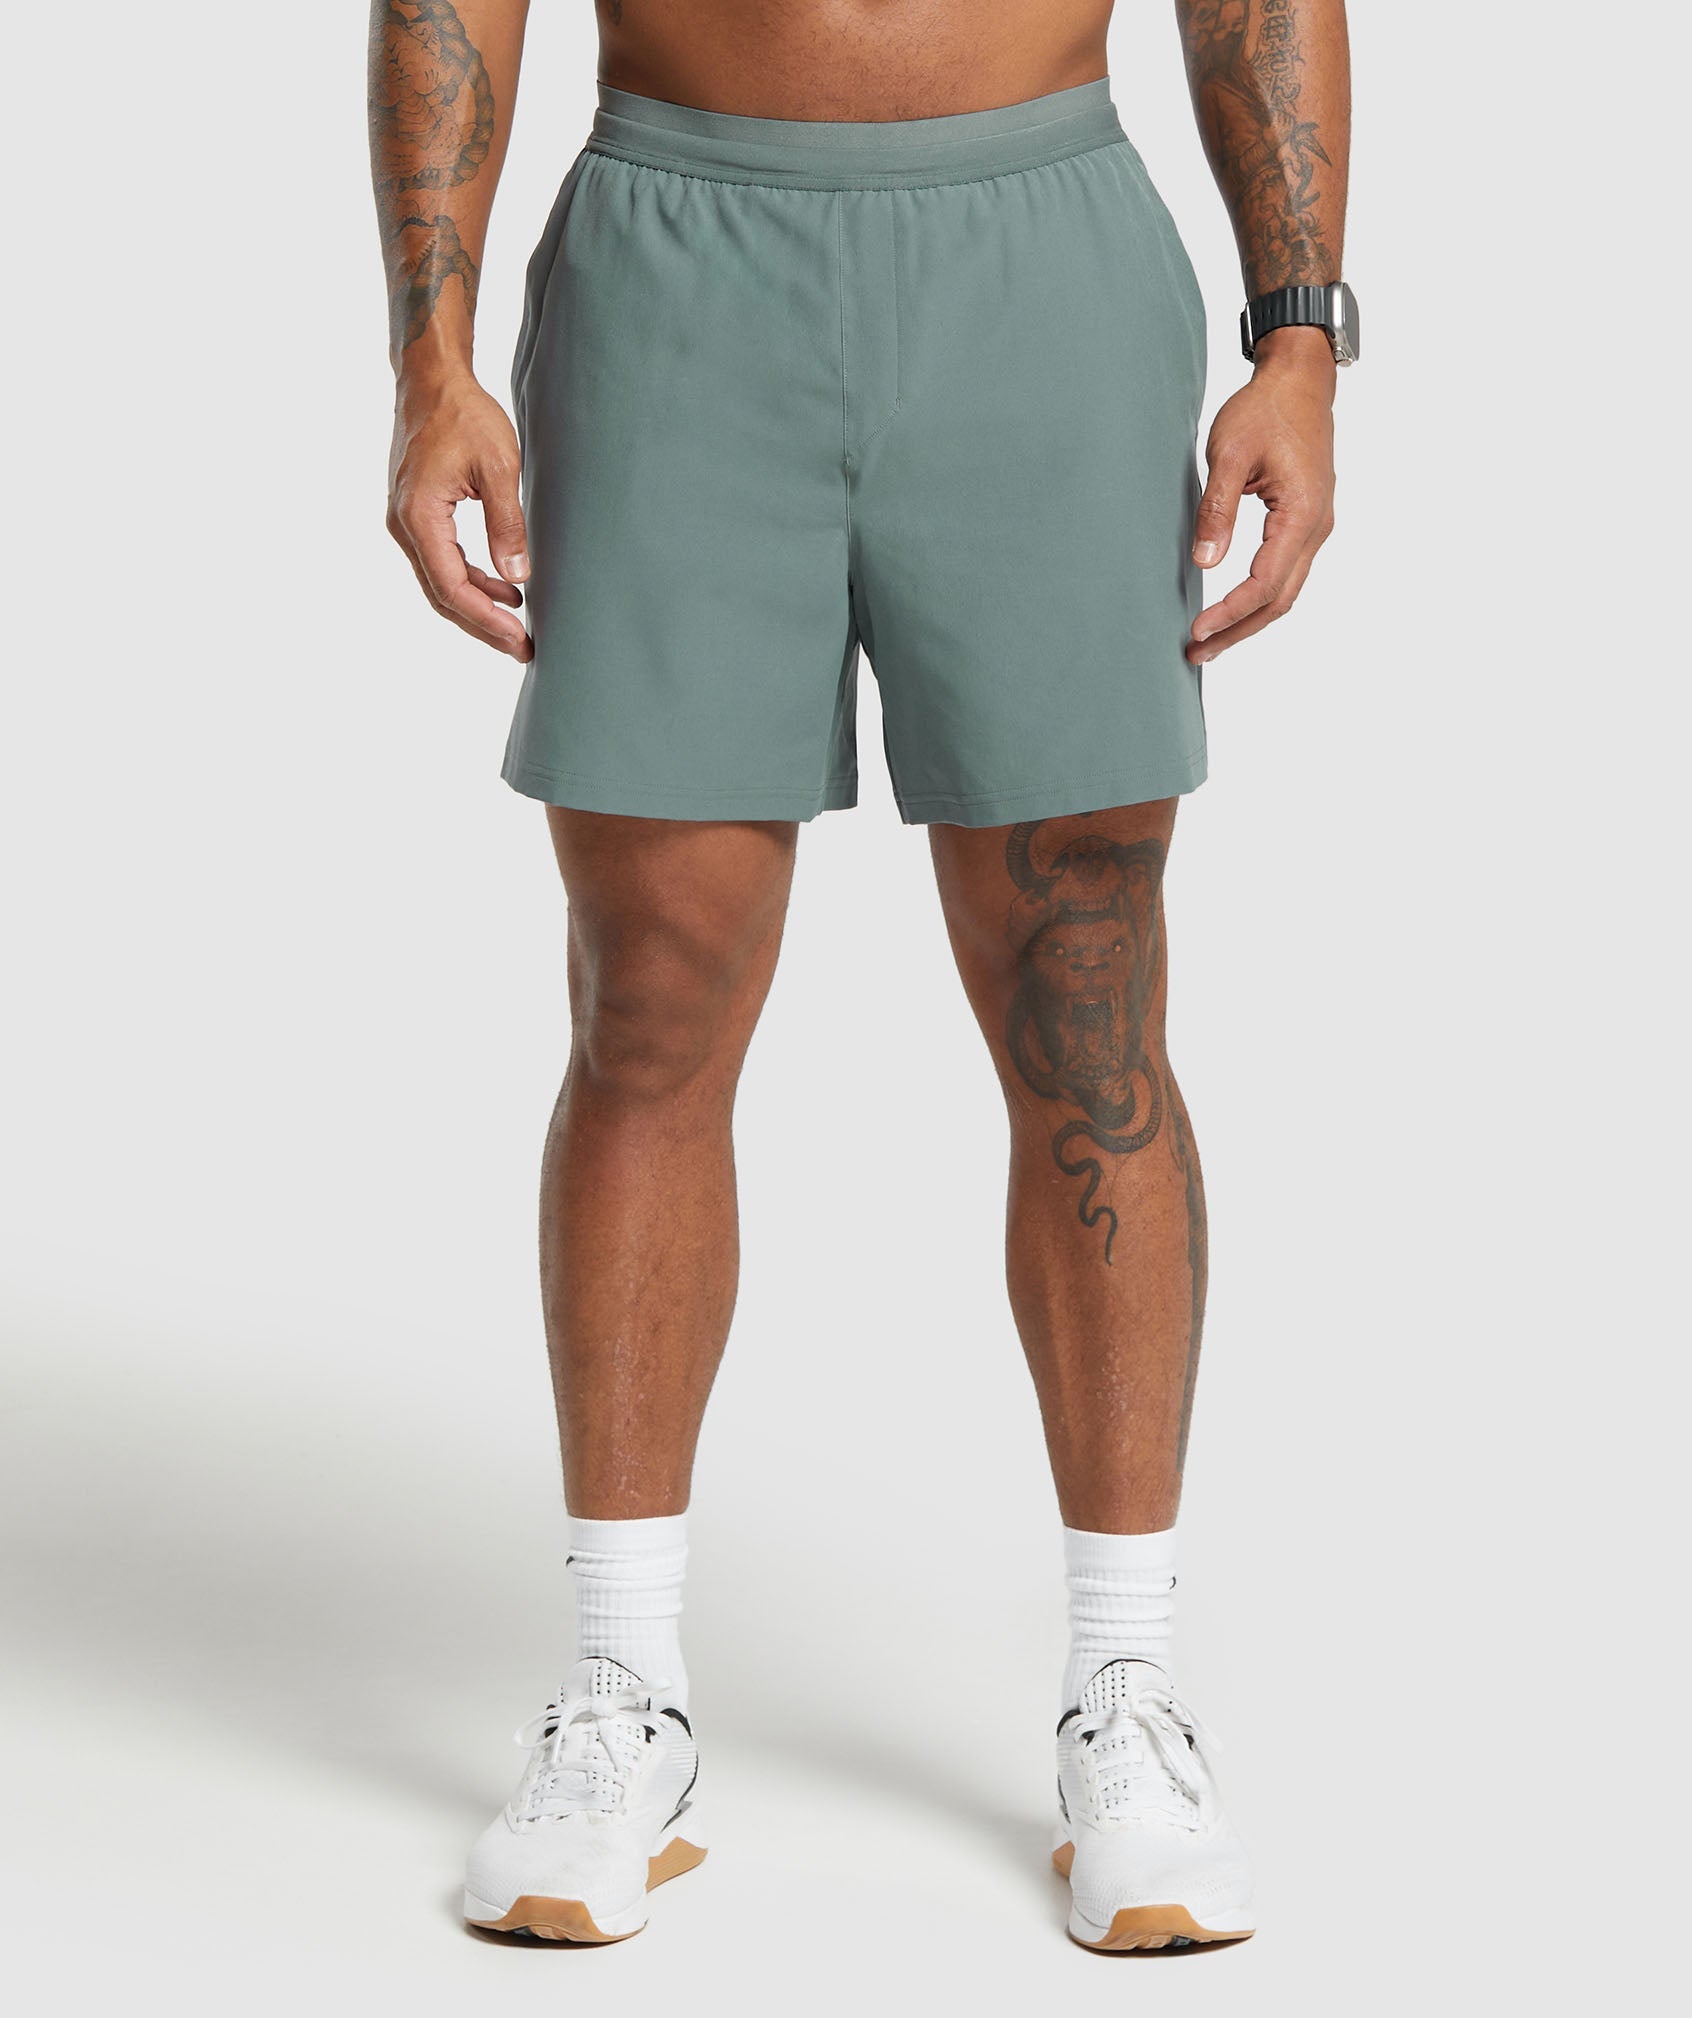 Land to Water 6" Shorts in Cargo Teal